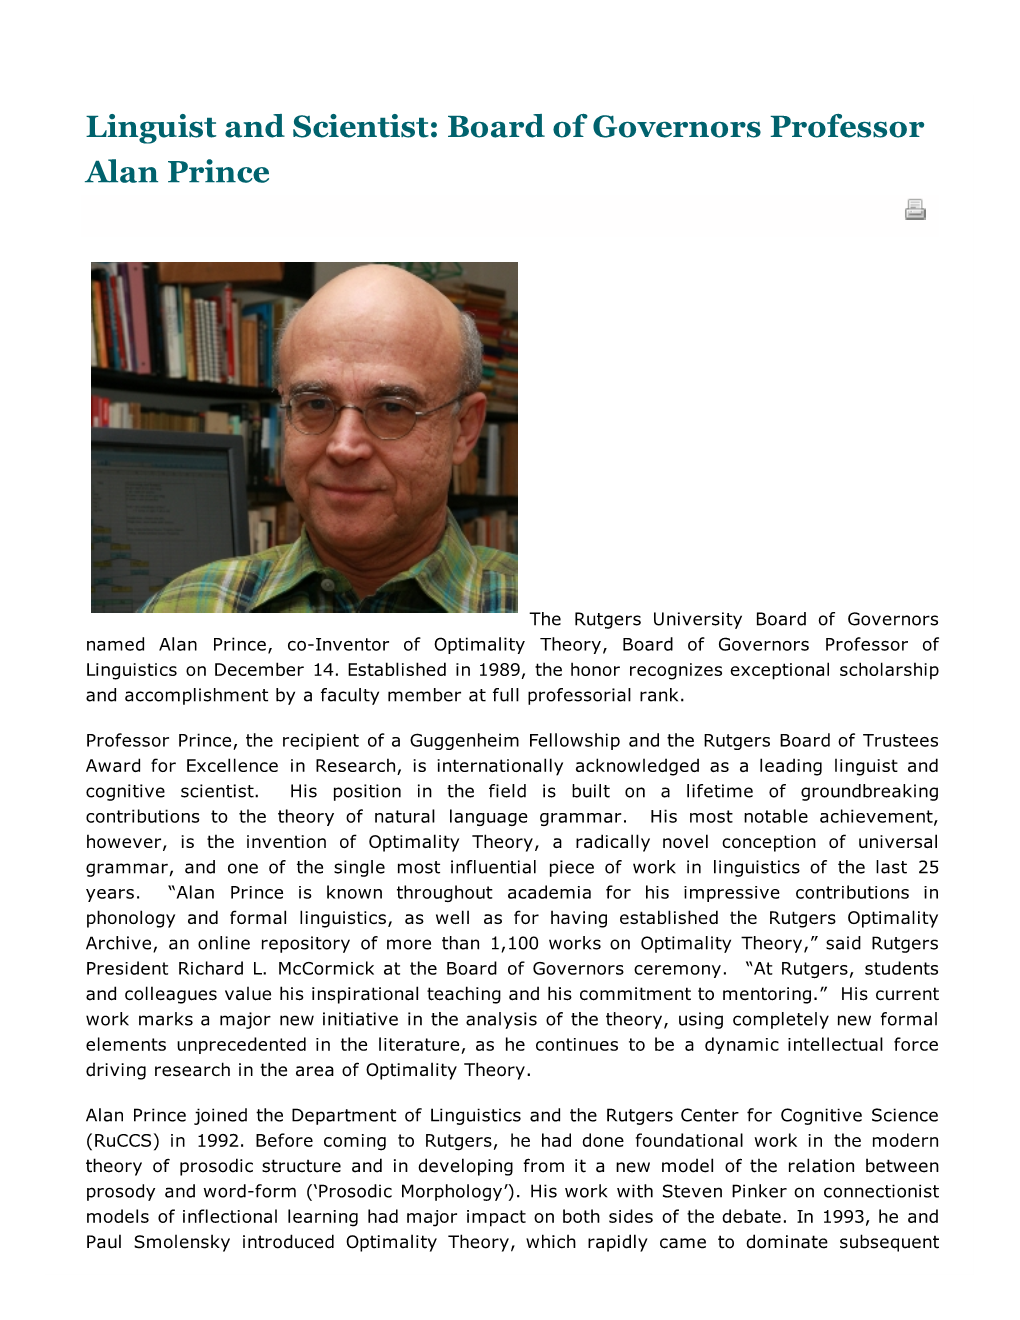 Linguist and Scientist: Board of Governors Professor Alan Prince